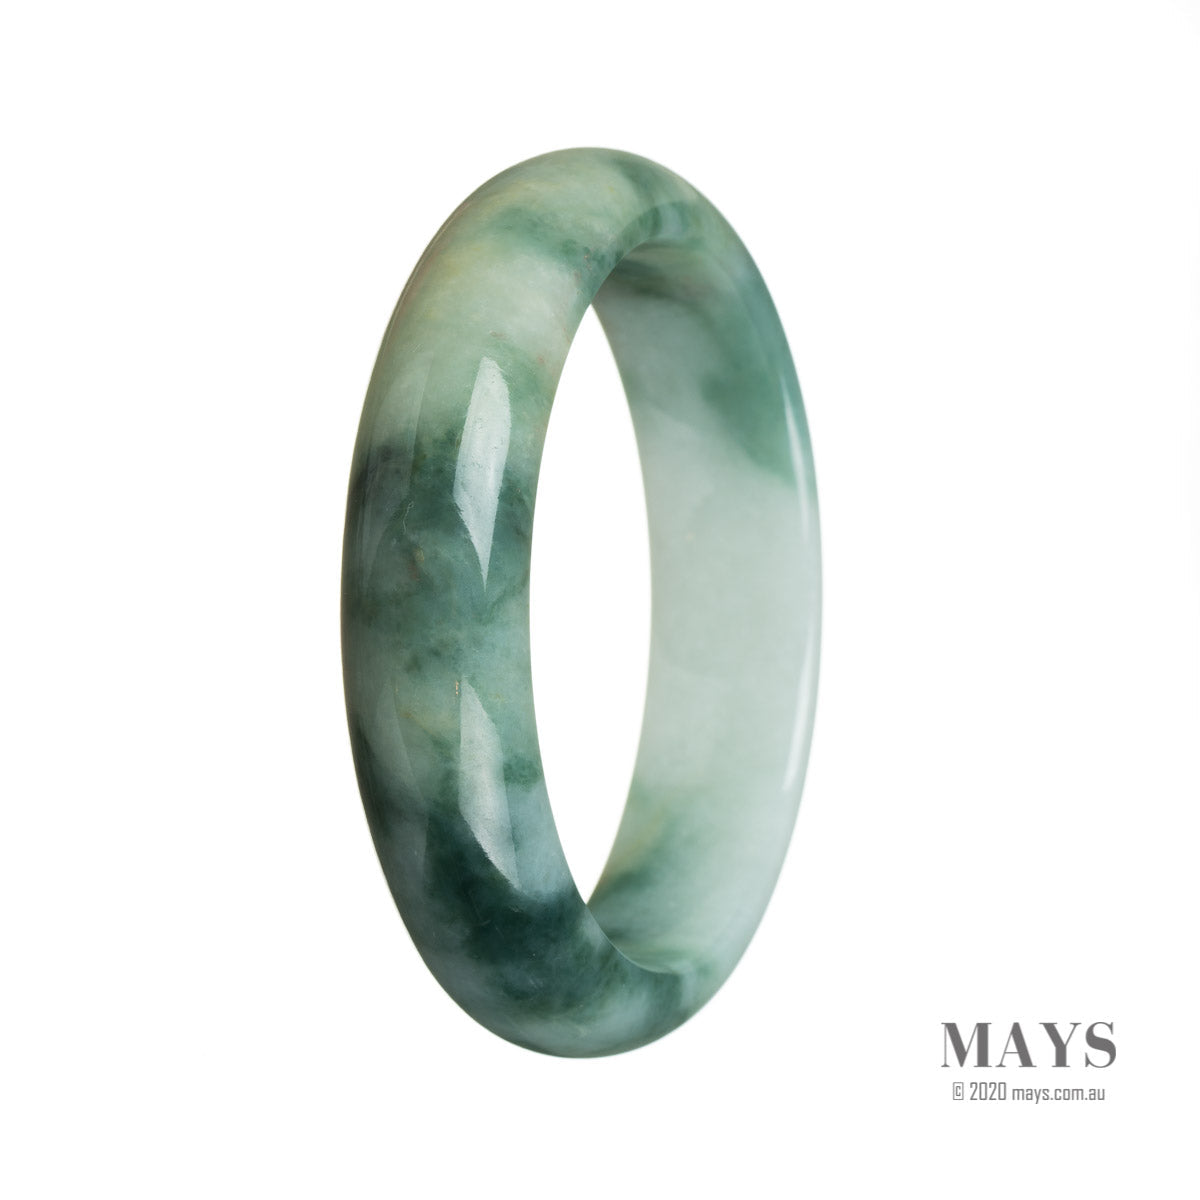 An elegant half moon-shaped jade bangle bracelet with a beautiful green hue, perfect for adding a touch of natural beauty to any outfit.